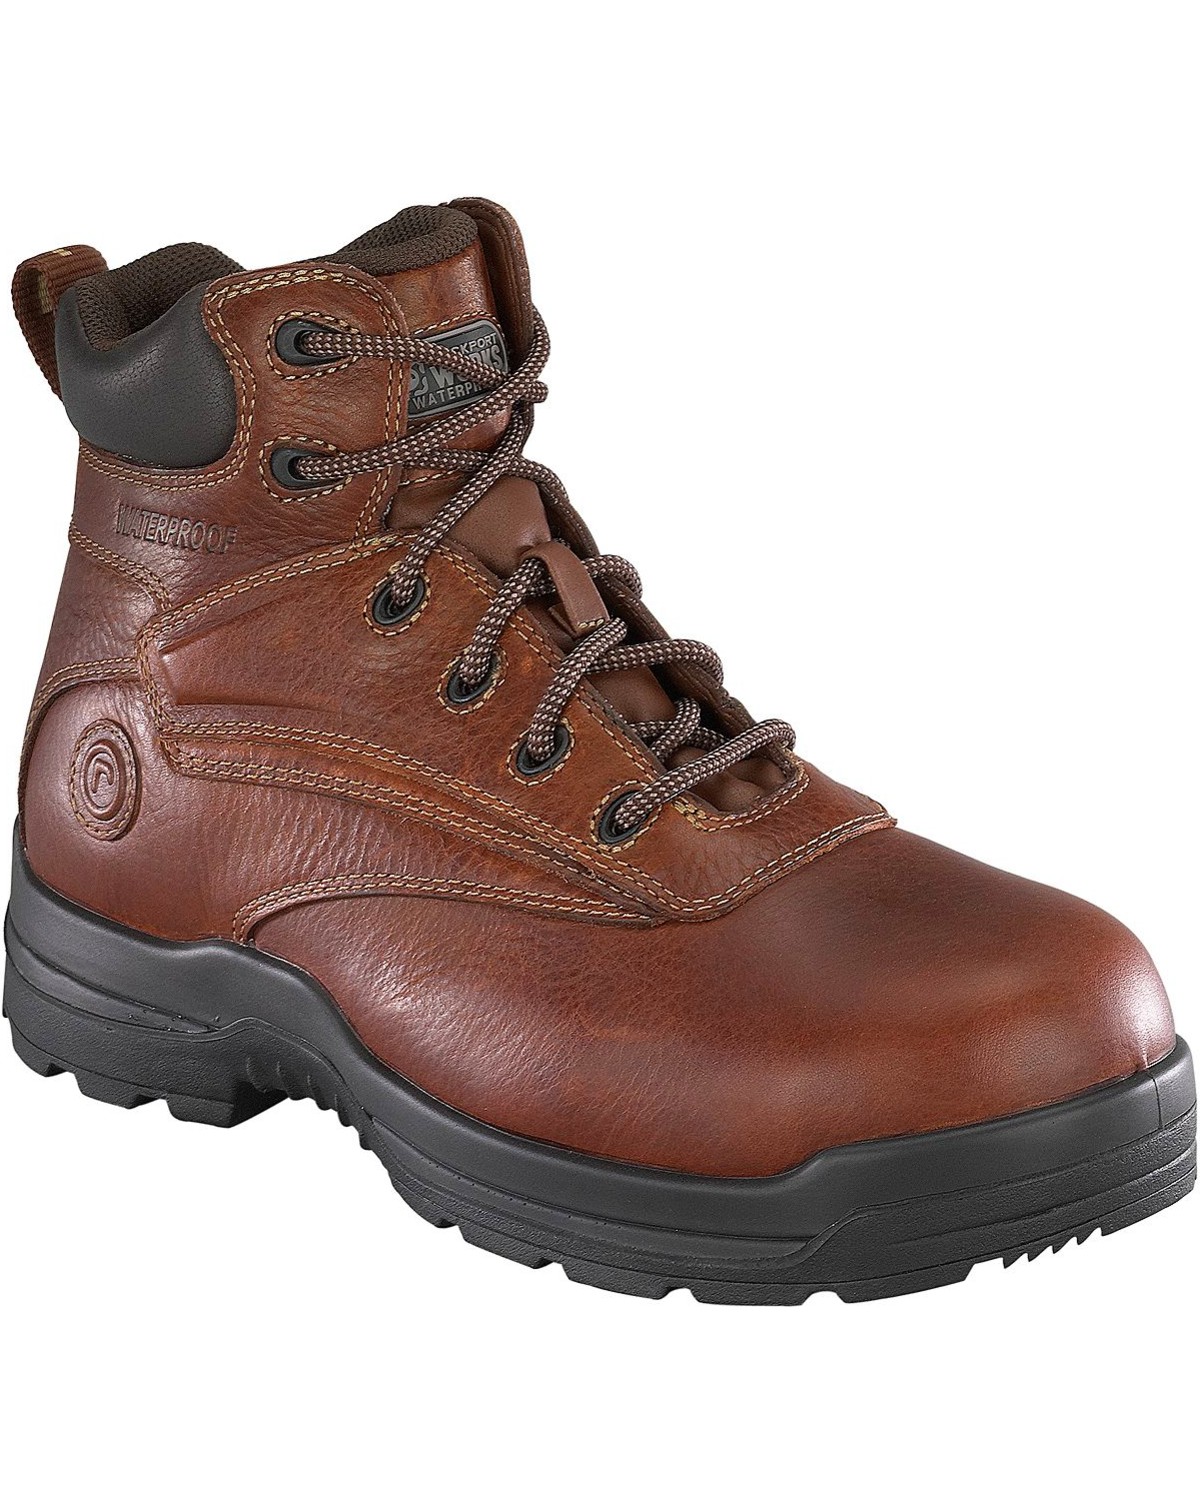 Rockport Women's More Energy Deer Tan 6" Lace-Up Work Boots - Composite Toe